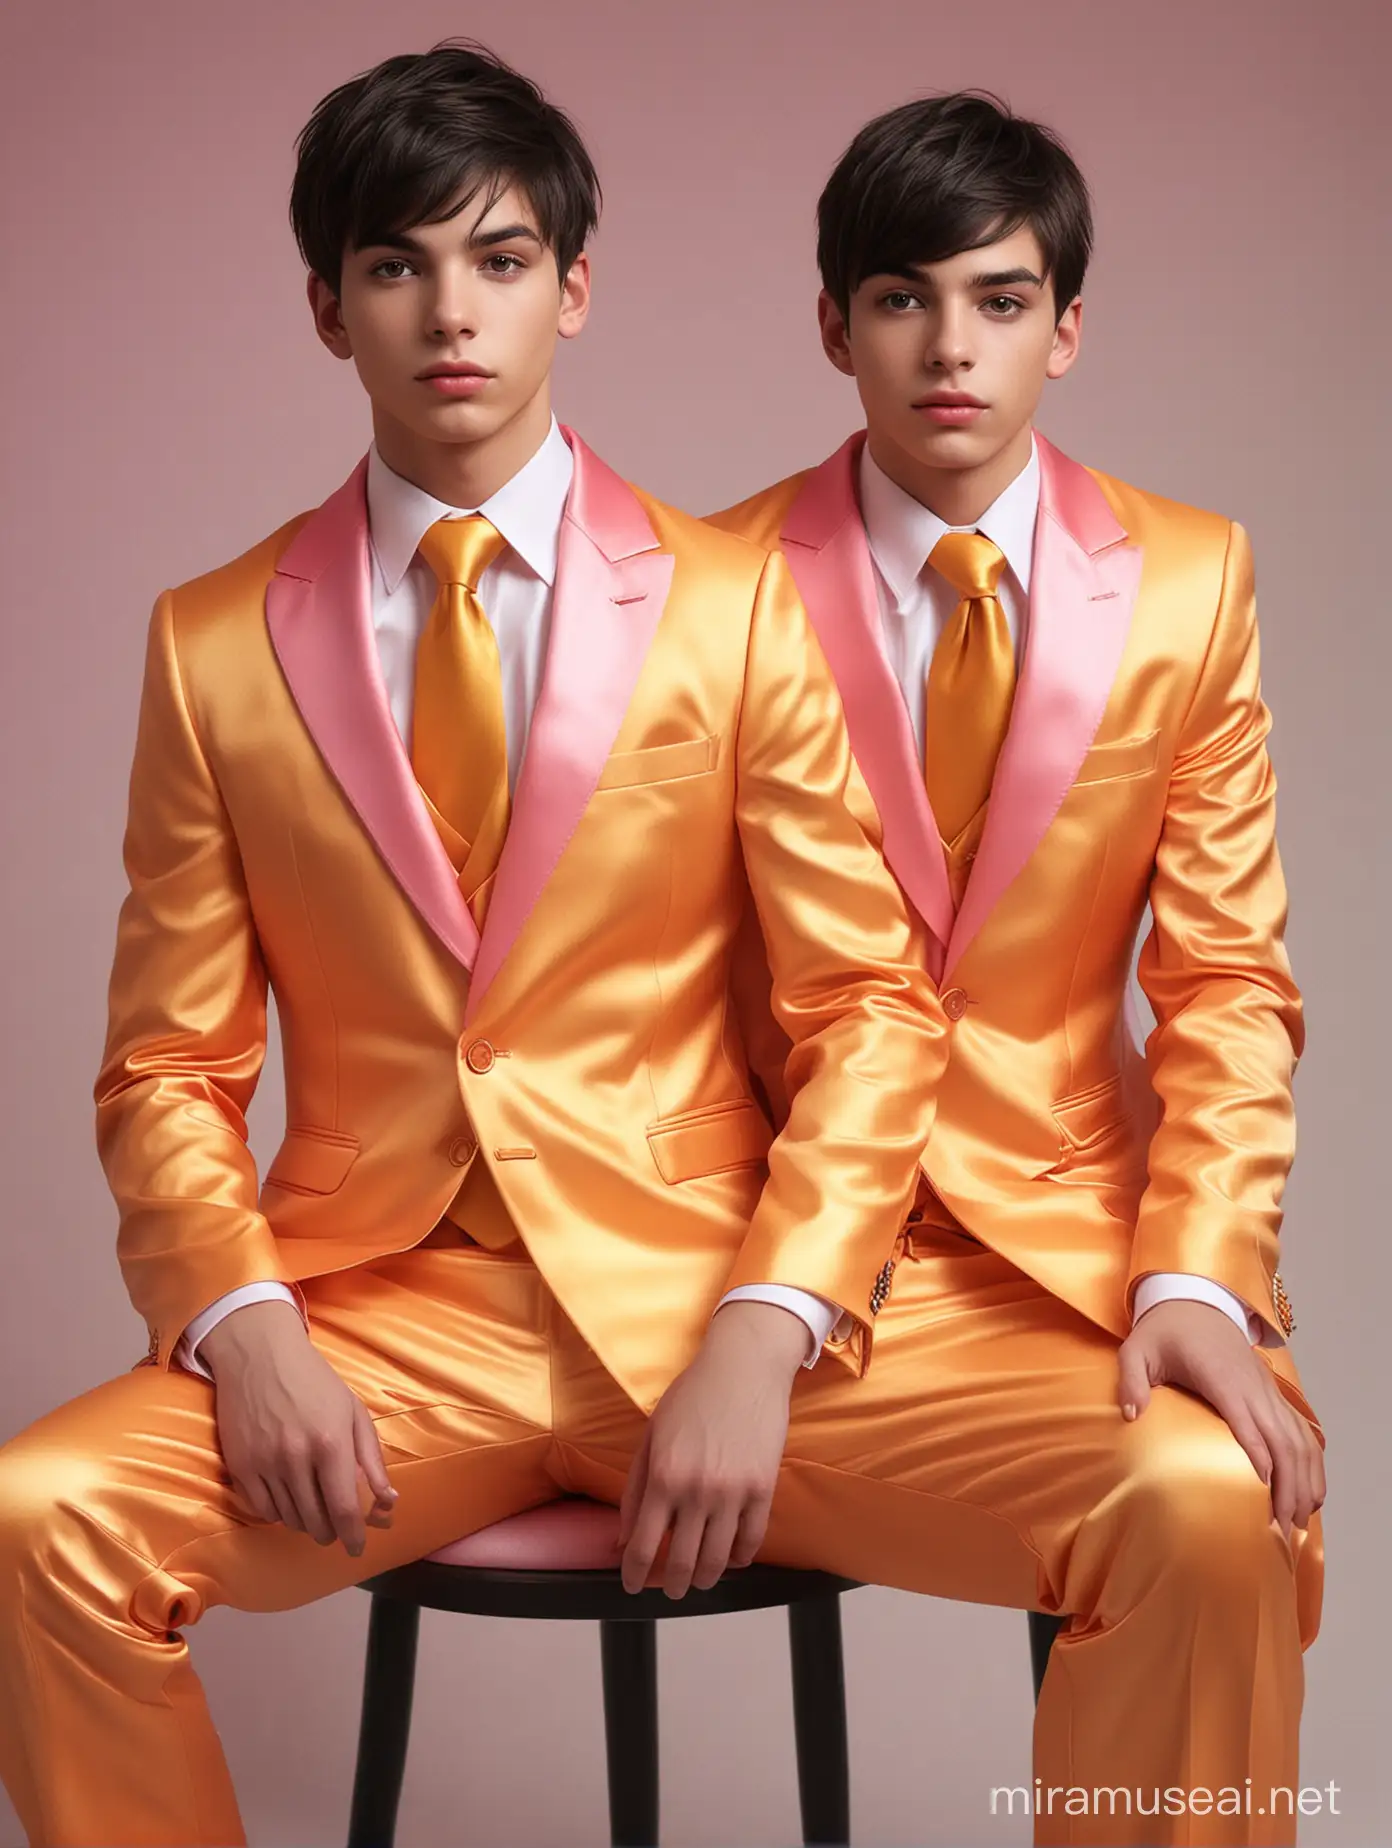 Full Body photo of 2 pretty boi twinks 20 year olds sitting on lap (((hyper-realistic face))) short dark hair, wearing shiny orange, yellow and pink satin suit and oversized tie (((detail on large shiny tie and suit pattern)))